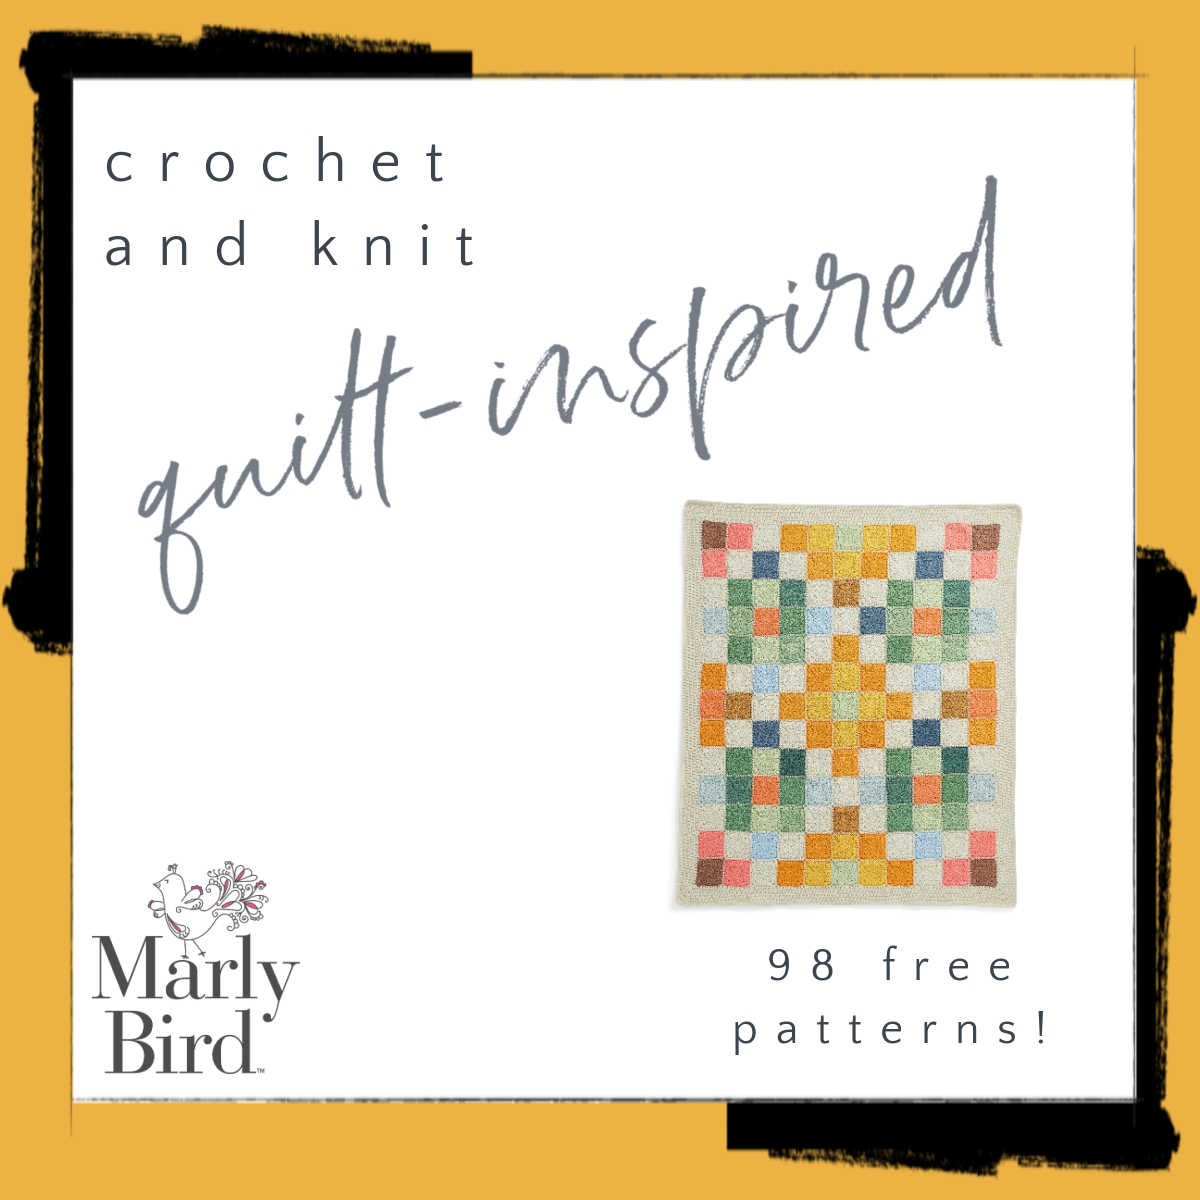 34 Free Applique Patterns to Crochet and Knit